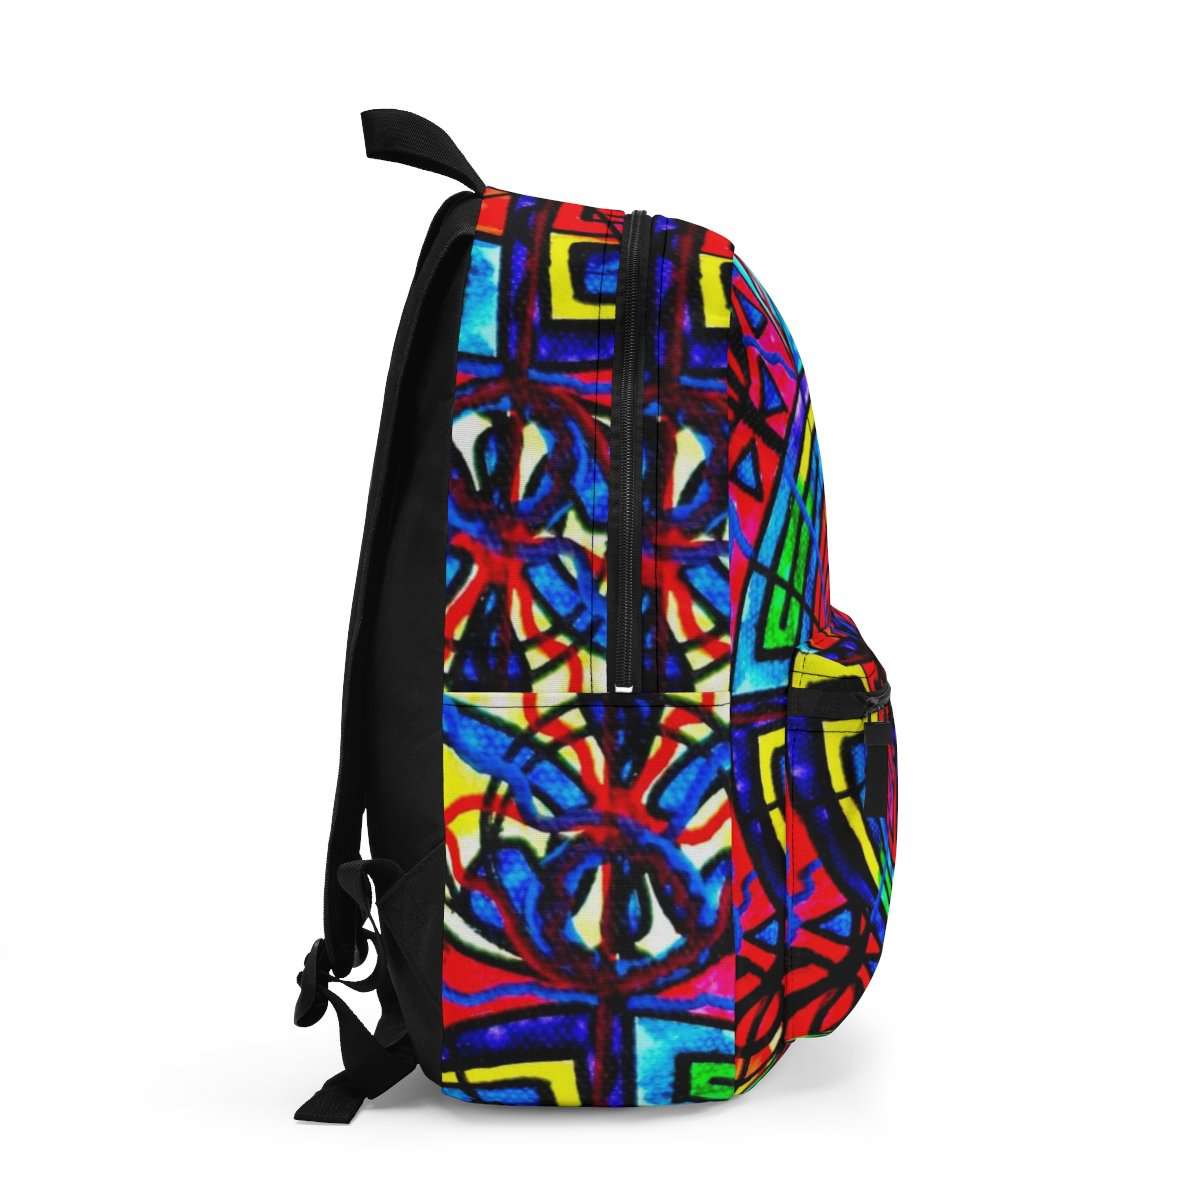 get-your-sporting-goods-of-labyrinth-aop-backpack-online-sale_1.jpg